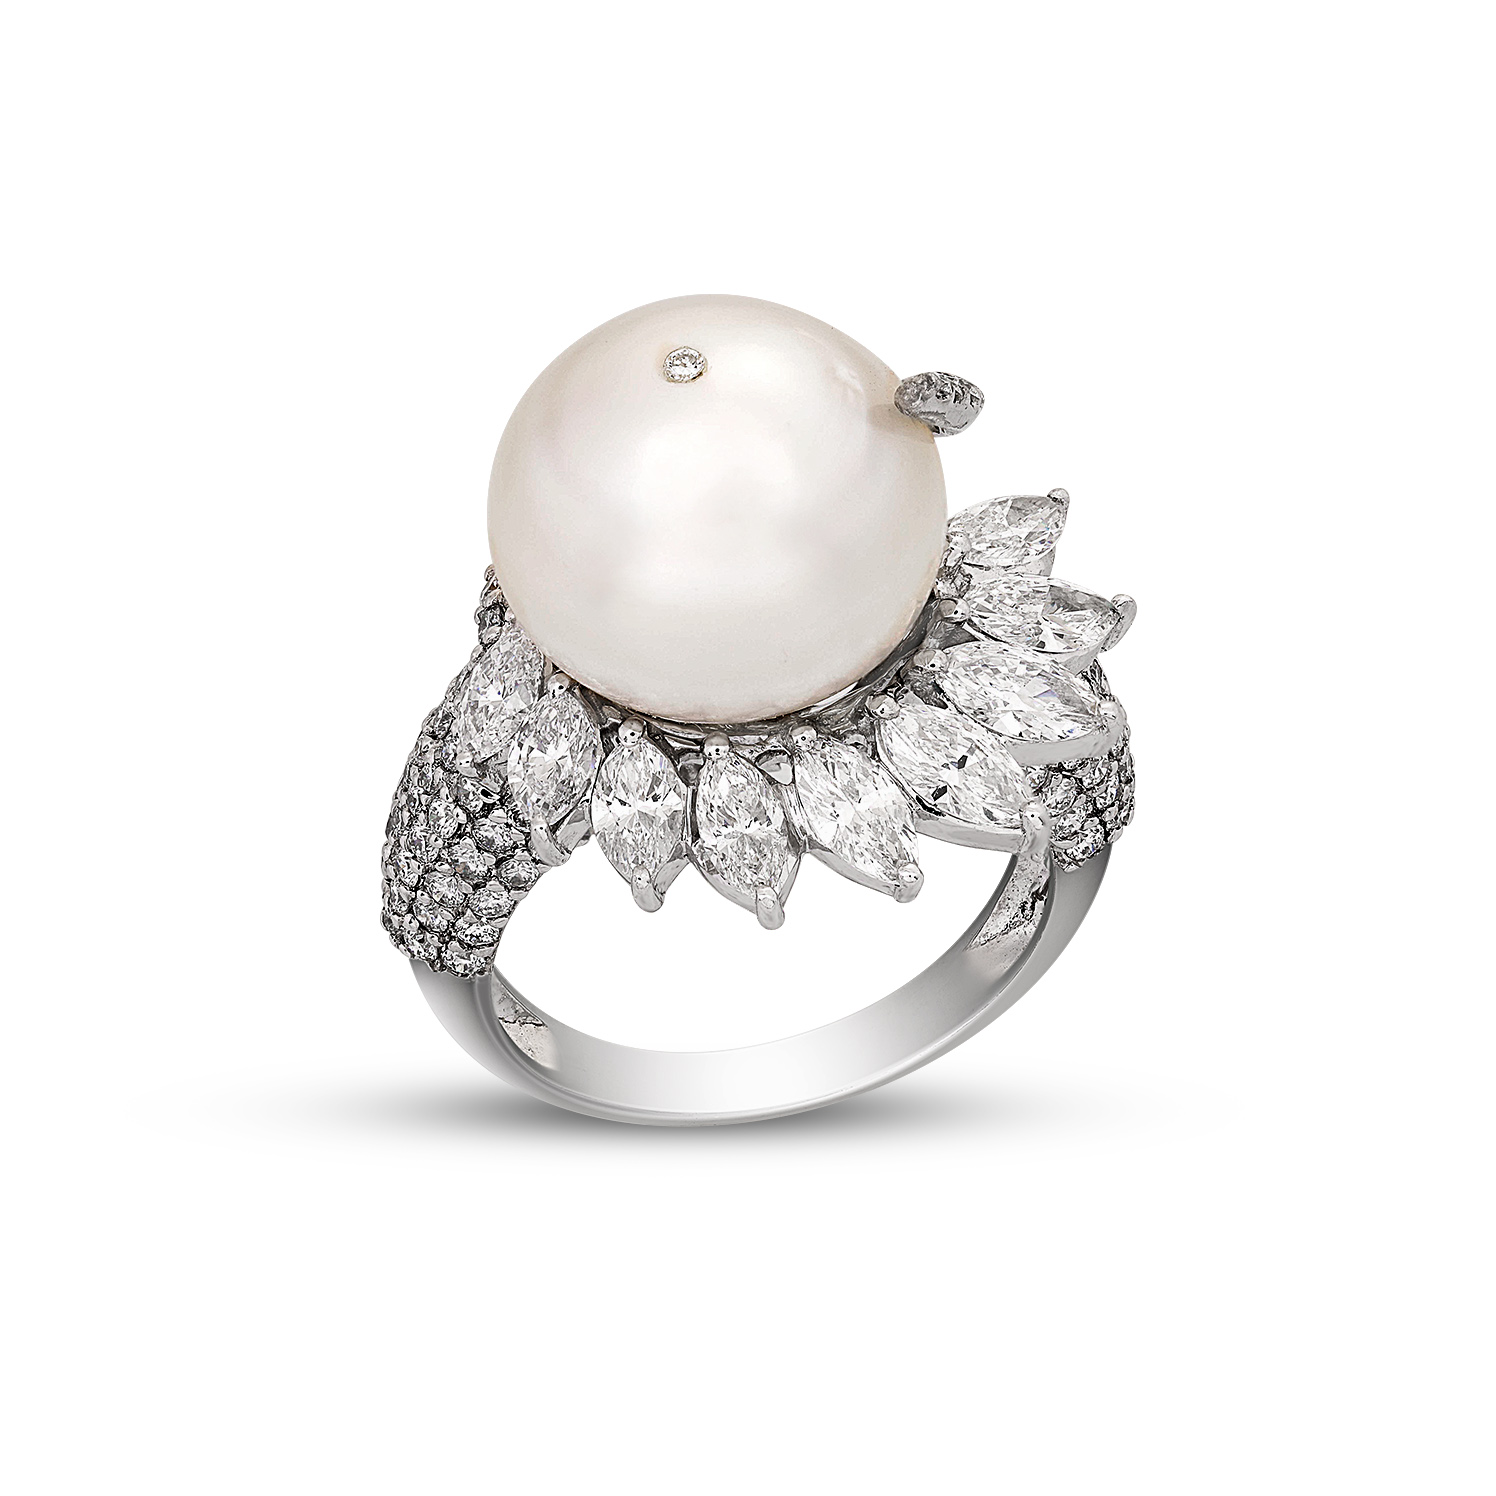 19 Pearl Engagement Rings That Are As Unique As They Are Stunning | Pearl  engagement ring, Gemstone jewelry, Tiffany jewelry